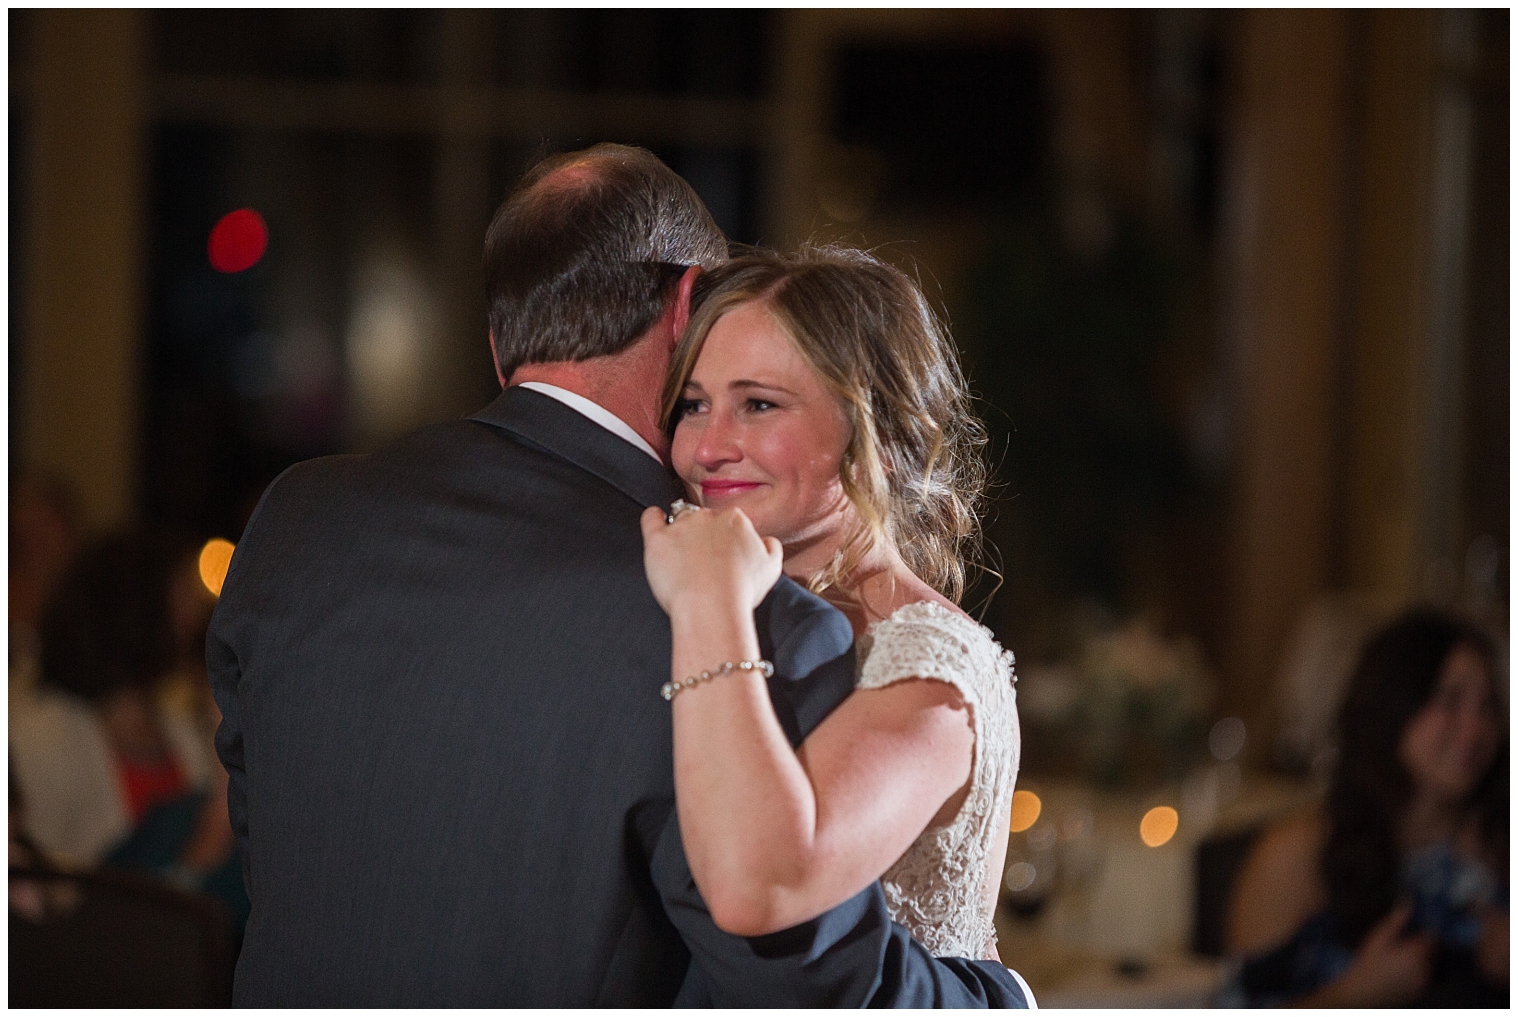 At her Copper Mountain wedding reception, the bride dances with her father in the father-daughter dance.